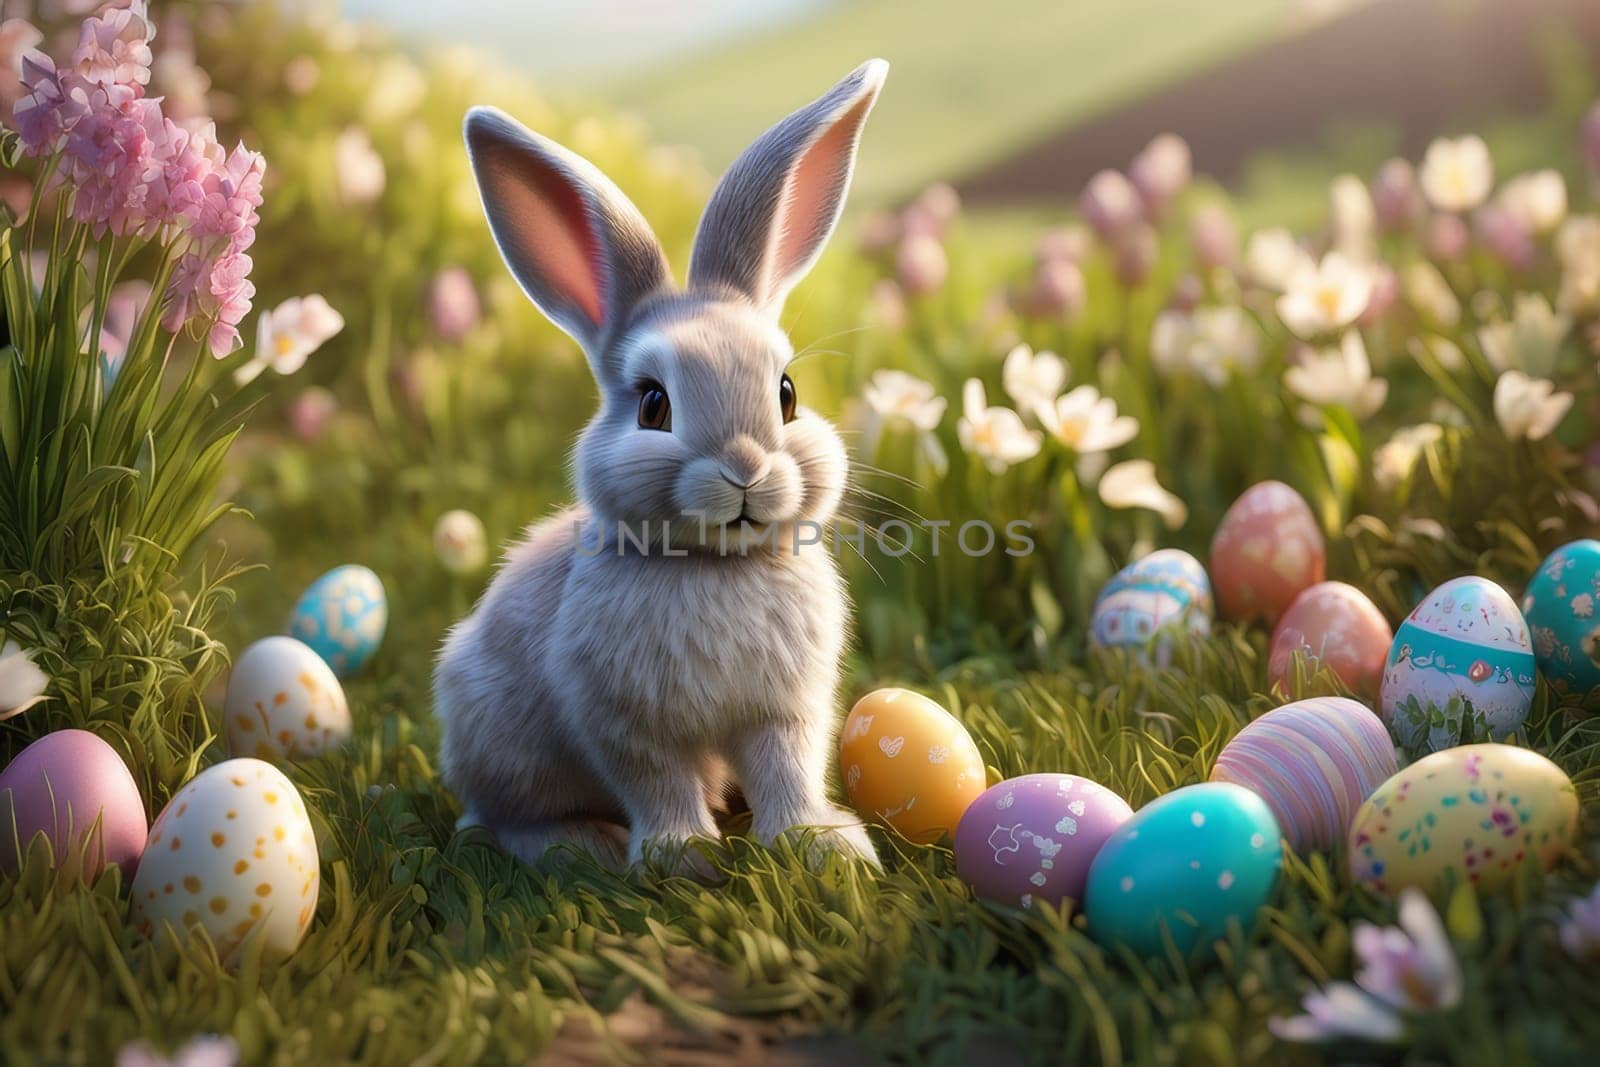 Little rabbit in a green spring lawn with decorated eggs - Easter card.